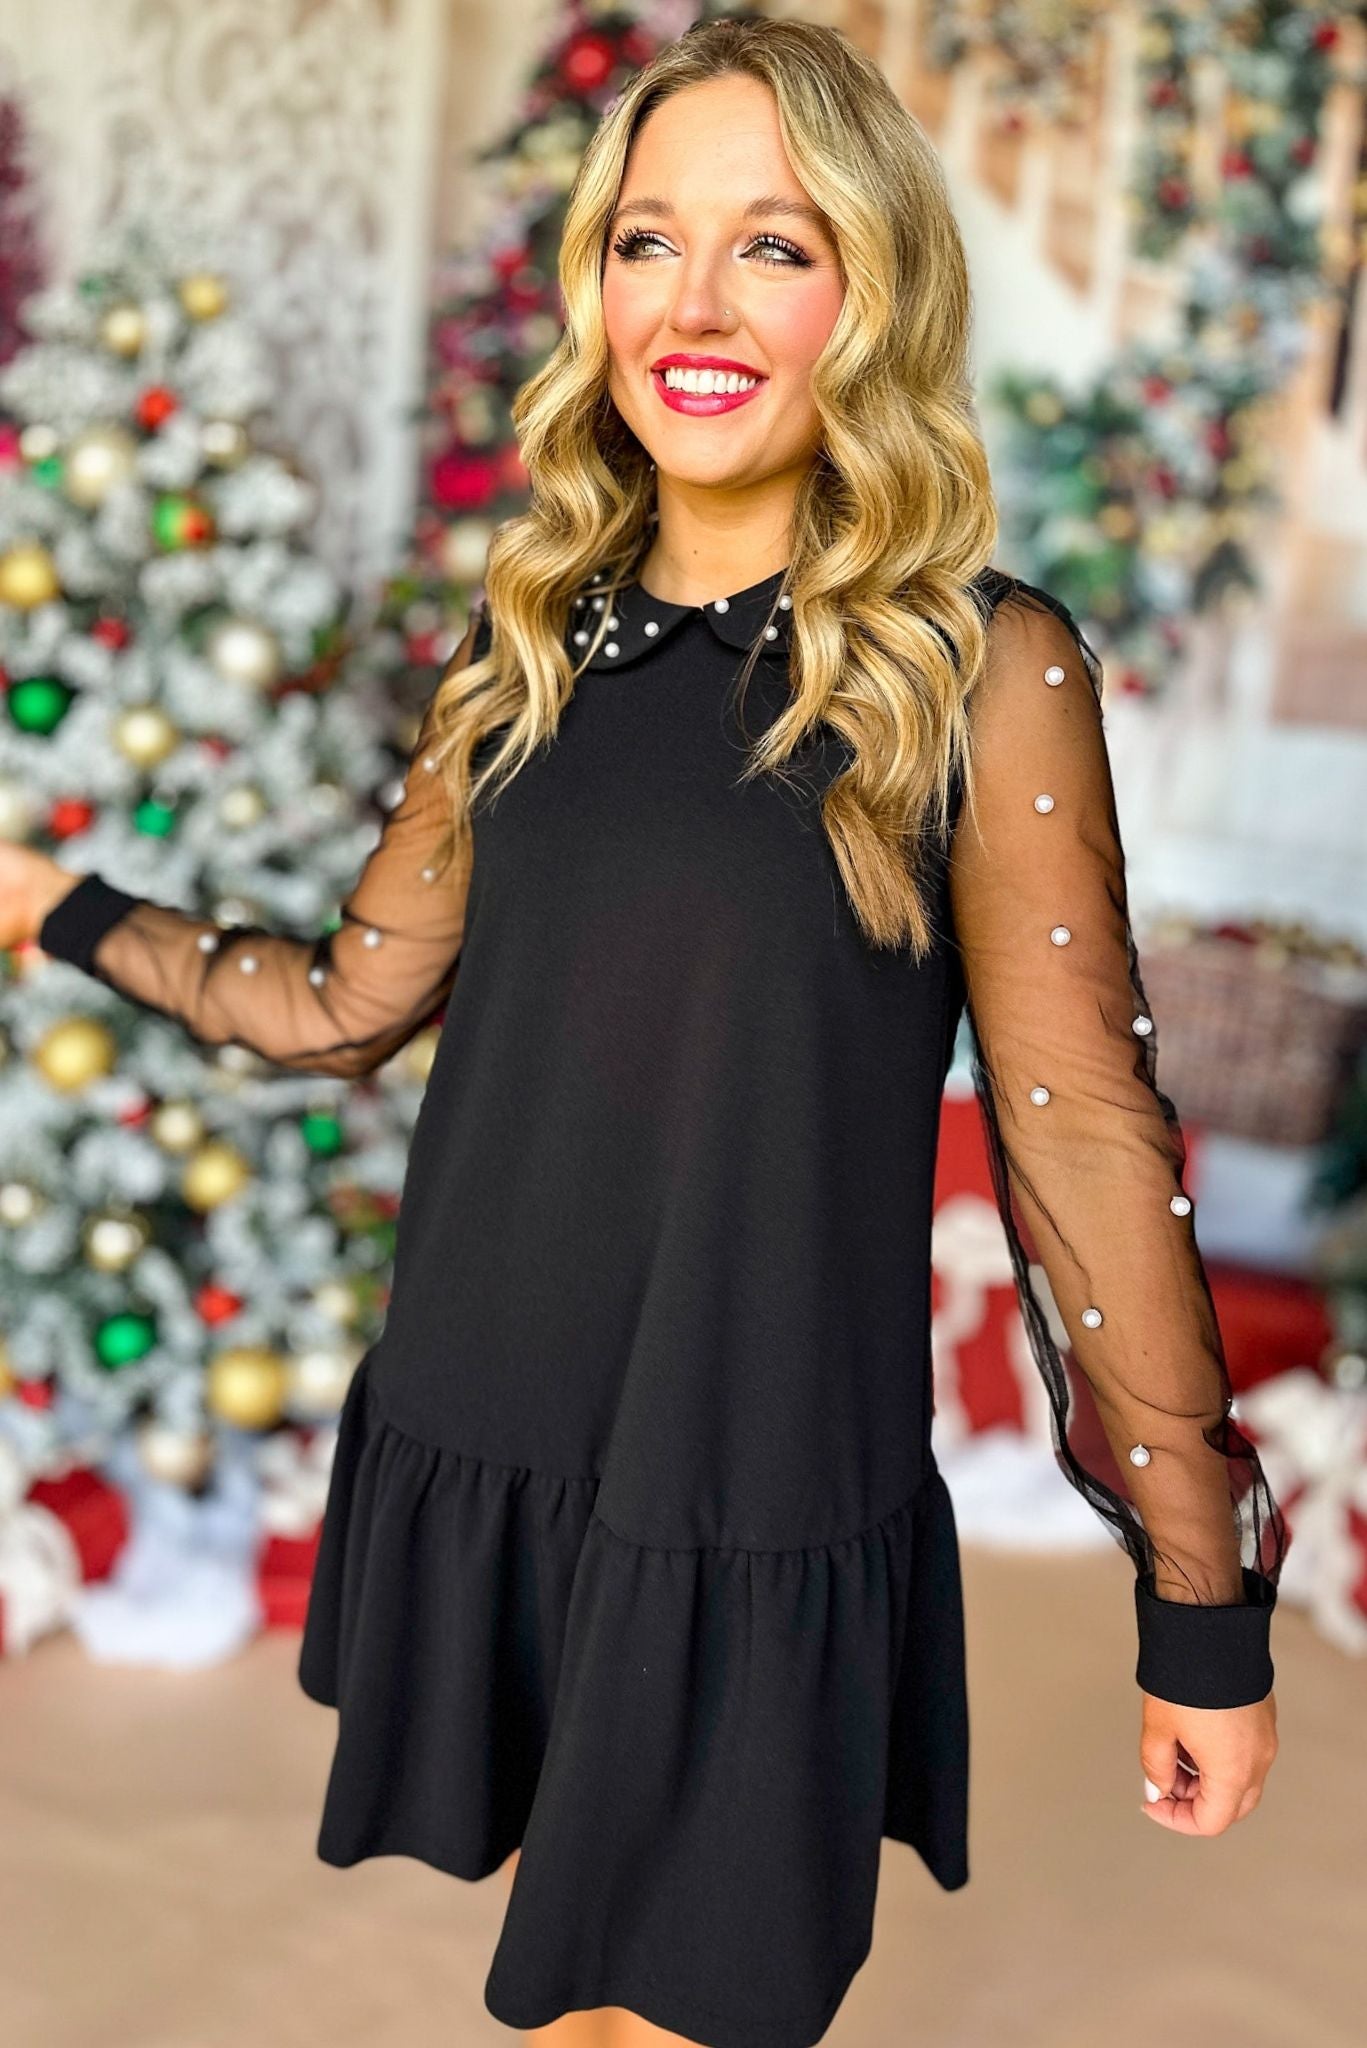 SSYS The Stella Dress In Black, must have dress, must have style, holiday style, holiday fashion, elevated style, elevated dress, mom style, holiday collection, holiday dress, shop style your senses by mallory fitzsimmons